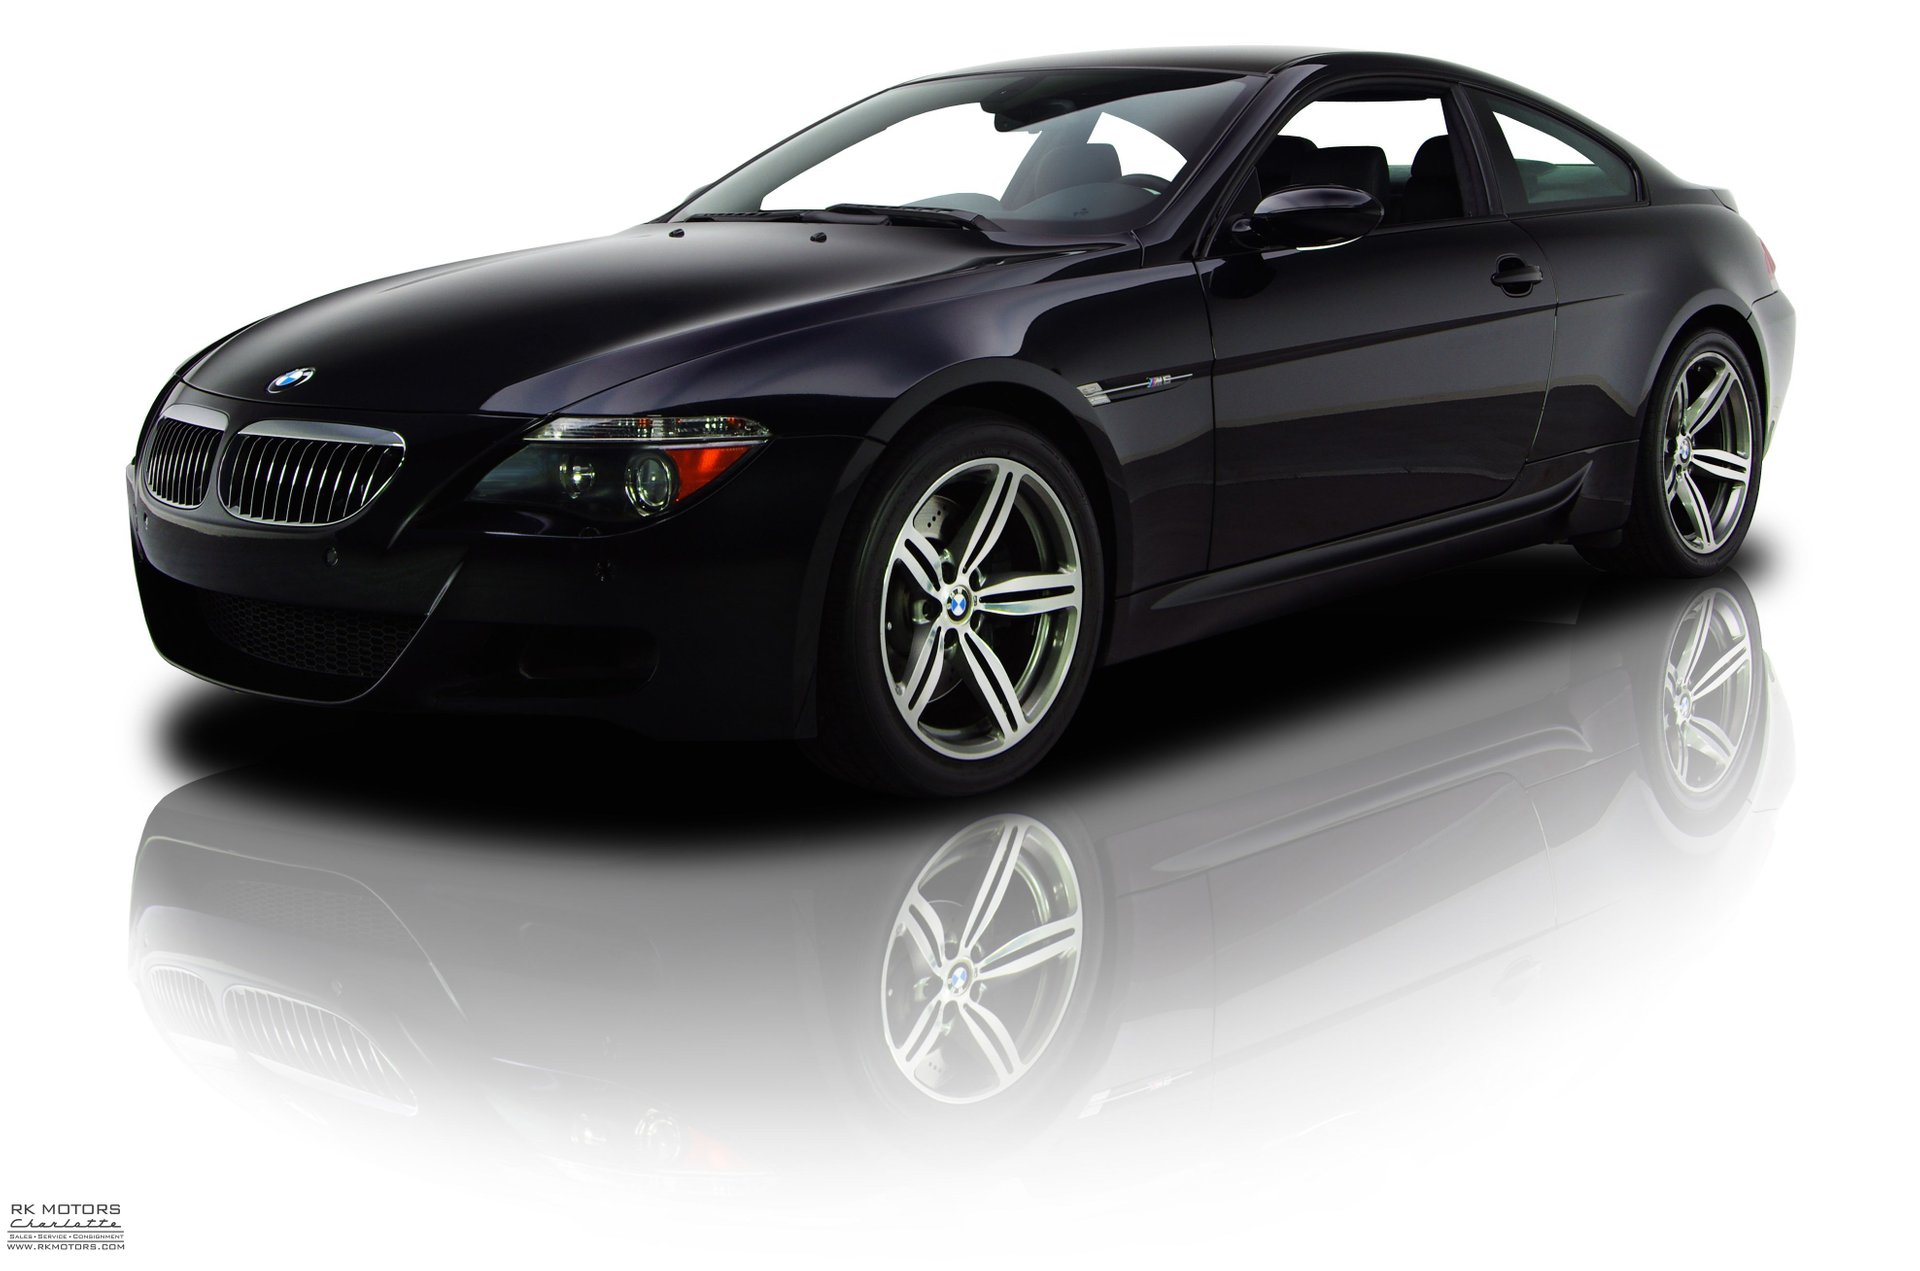 07 Bmw M6 Rk Motors Classic Cars And Muscle Cars For Sale